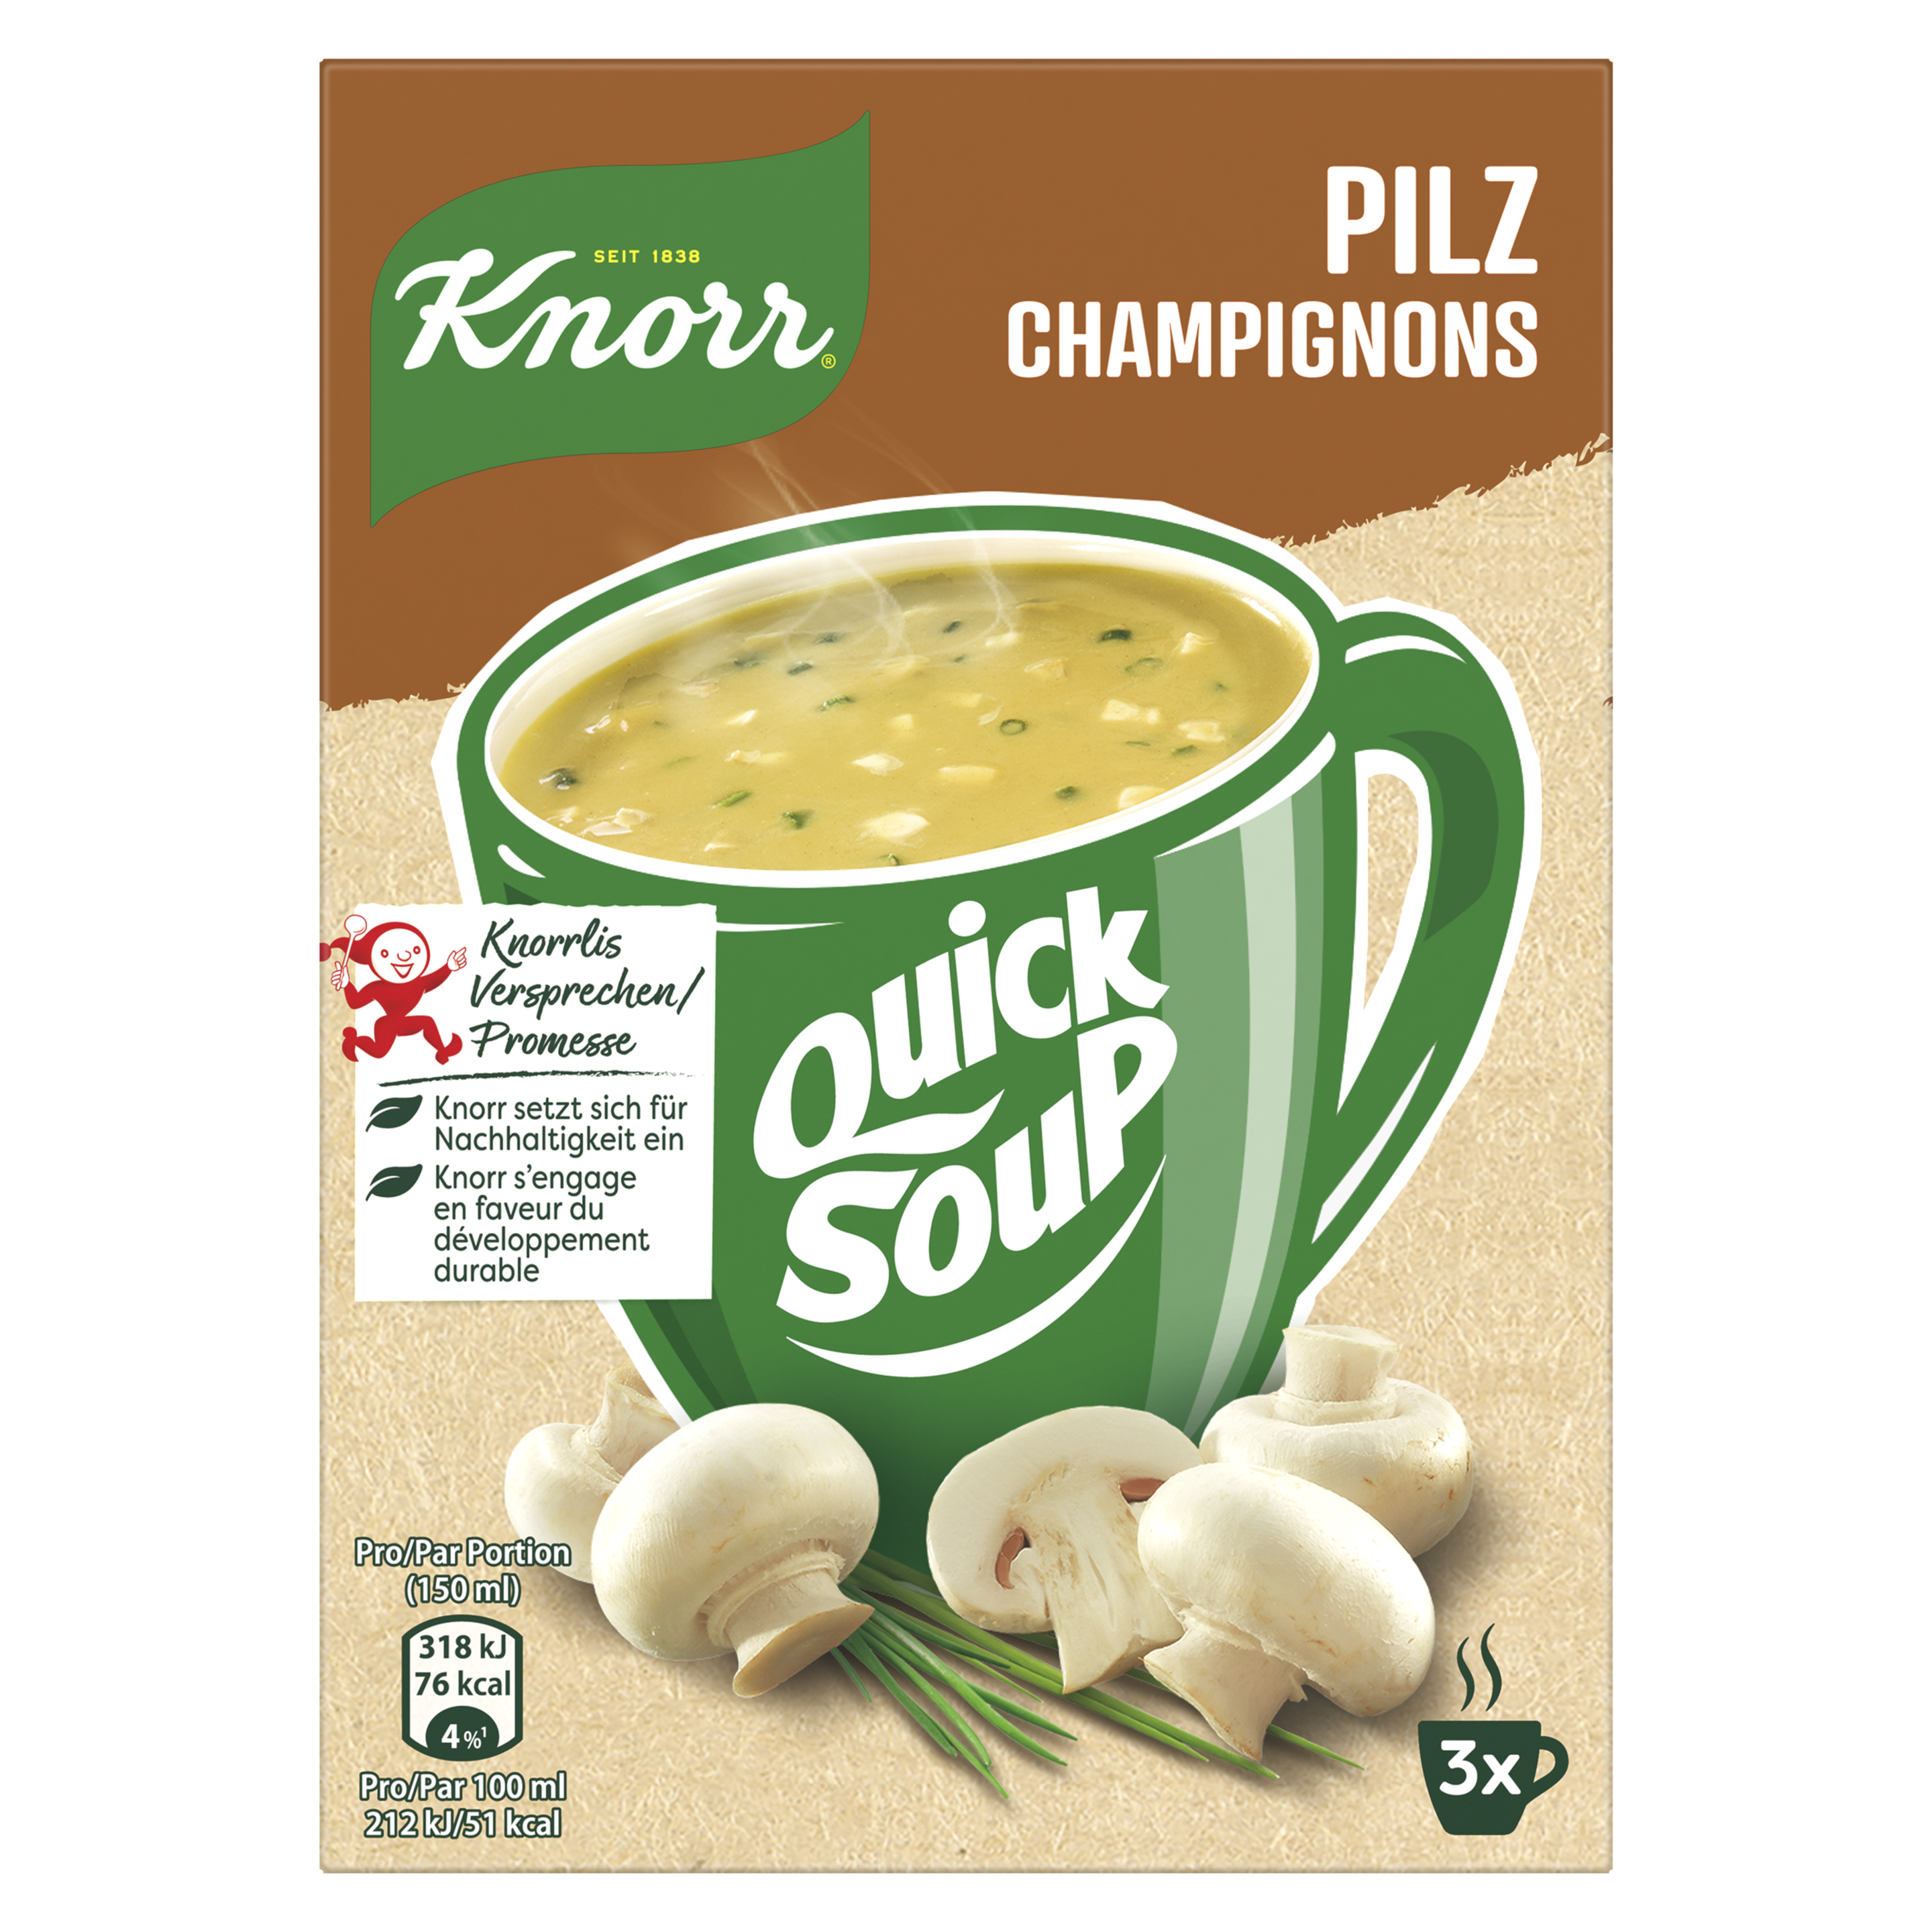 KNORR Quick Soup Pilz Packung 3 x 1 Portion